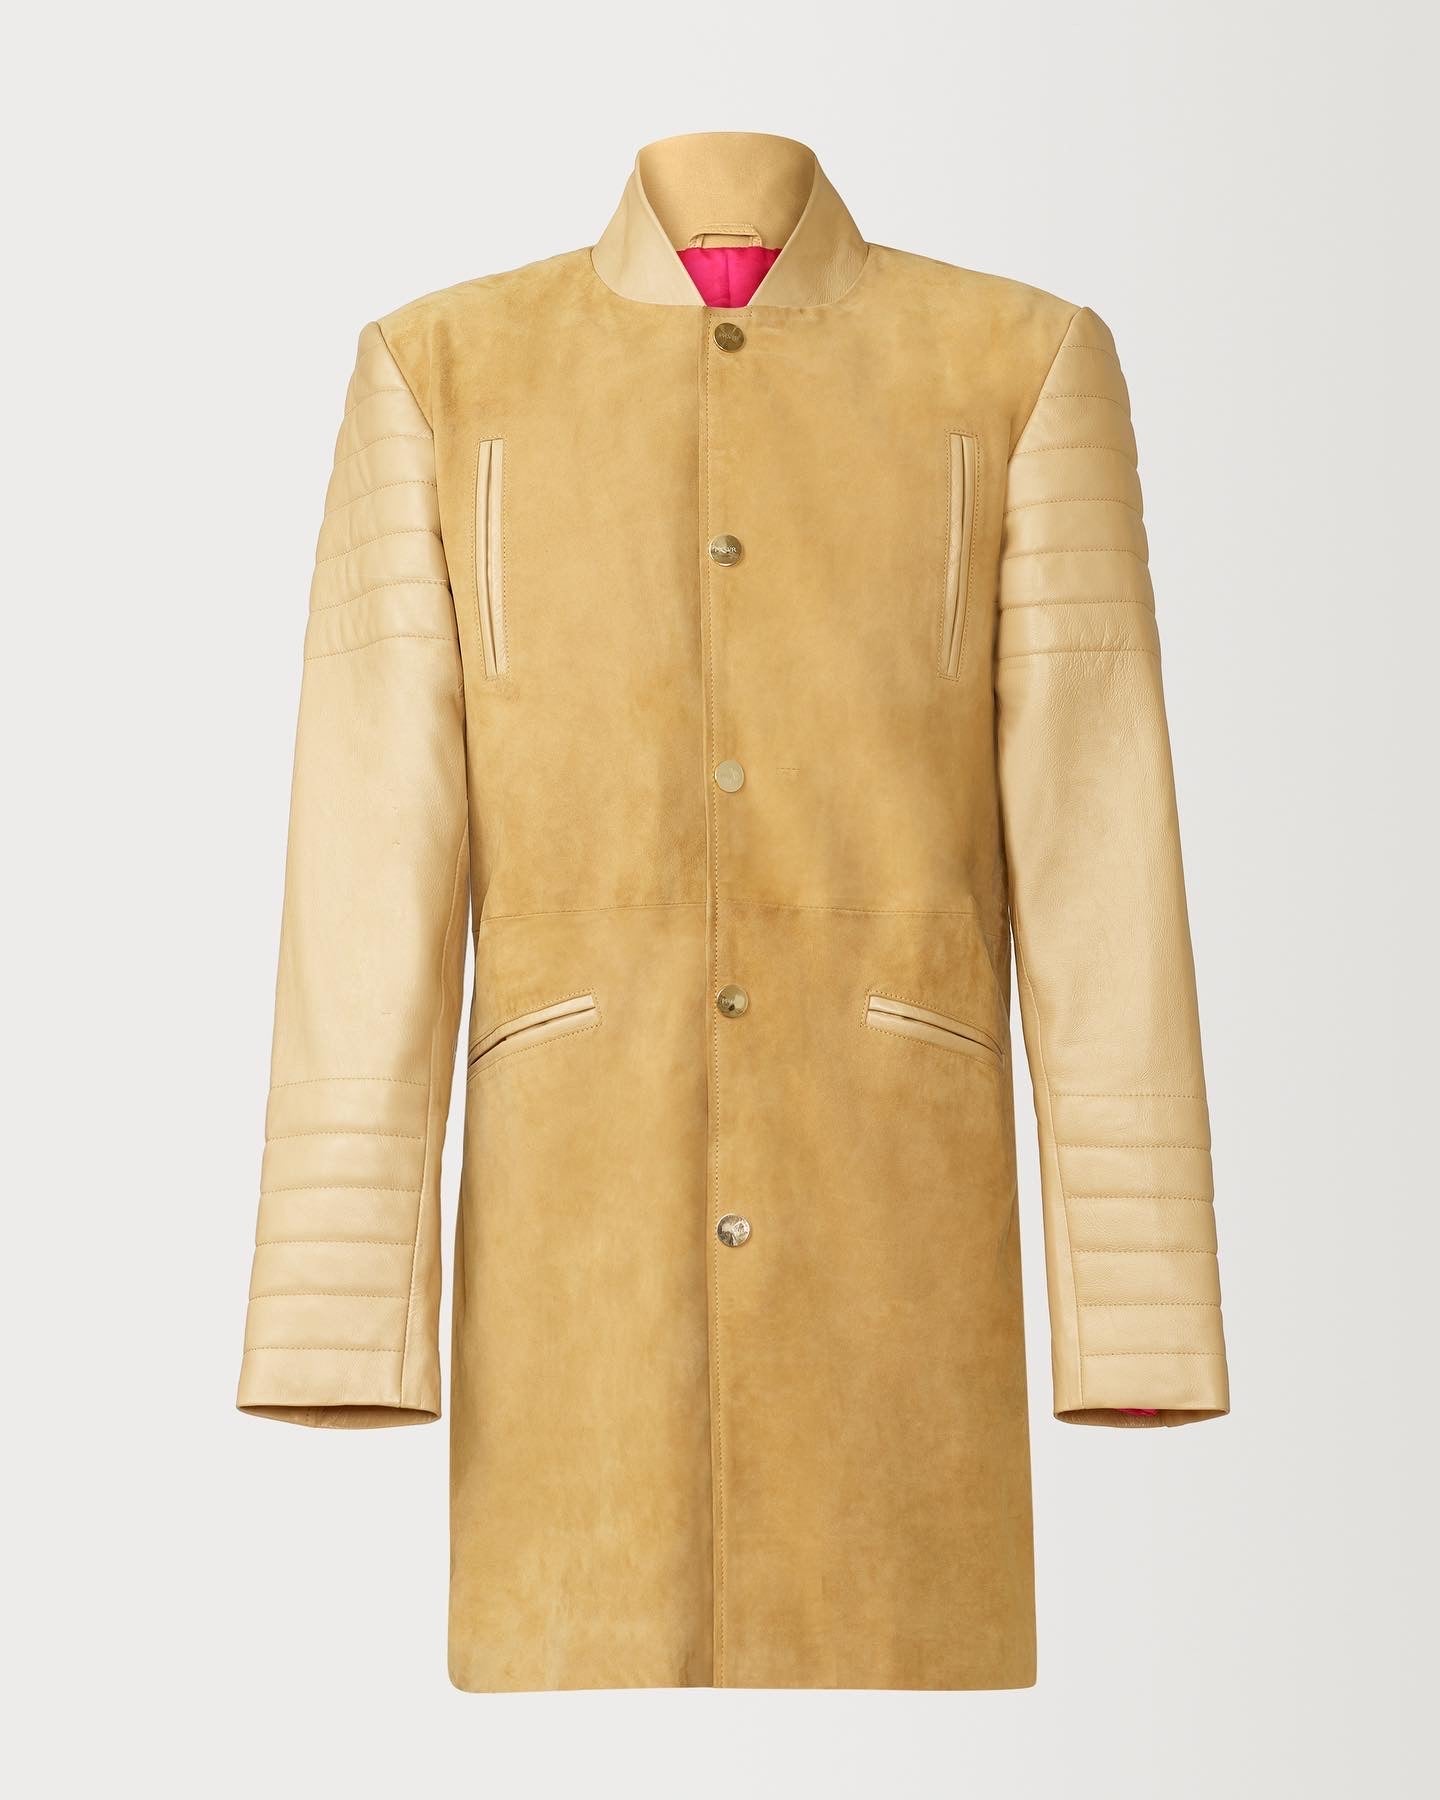 A Beautiful Suede Trench Coat, created by designer brand PRSVR. The PRSVR Lab Coat has a suede Body, and lambskin leather sleeves that show off a padded ribbed design on the shoulder and wrist of the sleeve. 